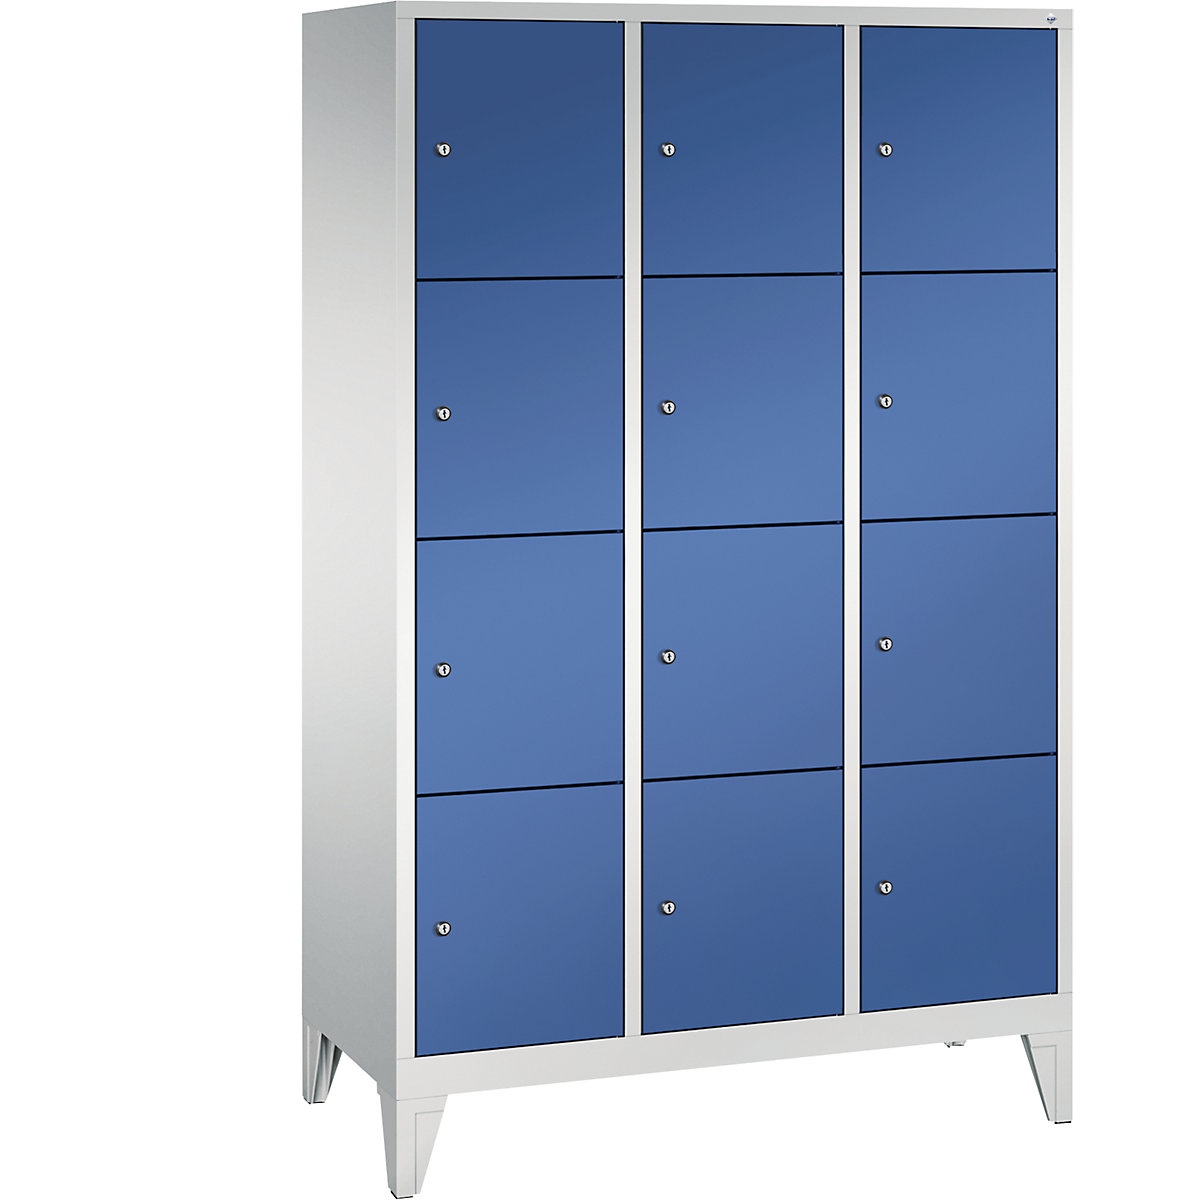 CLASSIC locker unit with feet – C+P, 3 compartments, 4 shelf compartments each, compartment width 400 mm, light grey / gentian blue-5